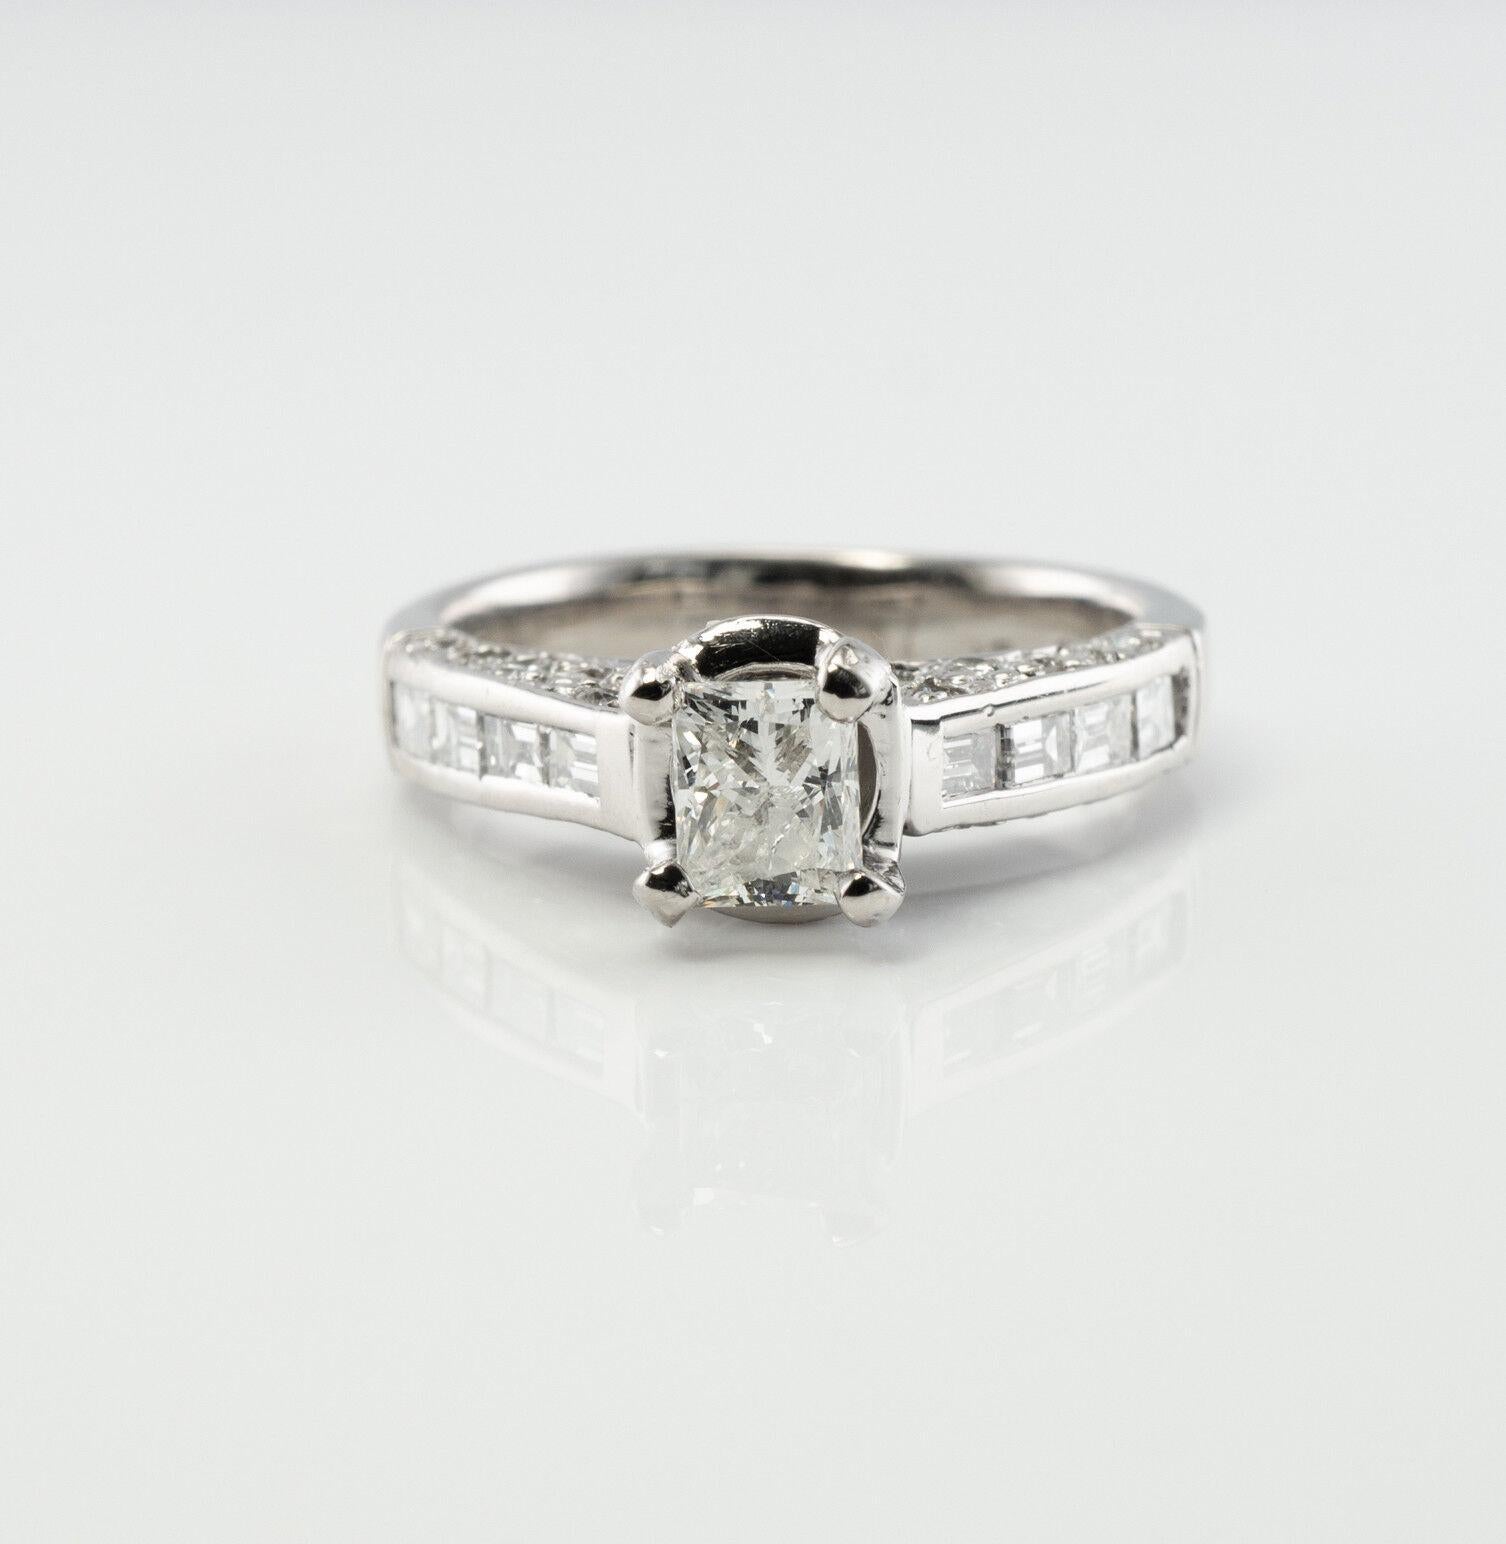 Diamond Ring Platinum Band 1.40 TDW EGL Certified

This incredible ring is finely crafted in solid Platinum and set with genuine sparkling diamonds. The center diamond has an EGL certificate stating this is .52ct gem of VS2 clarity and G color. The